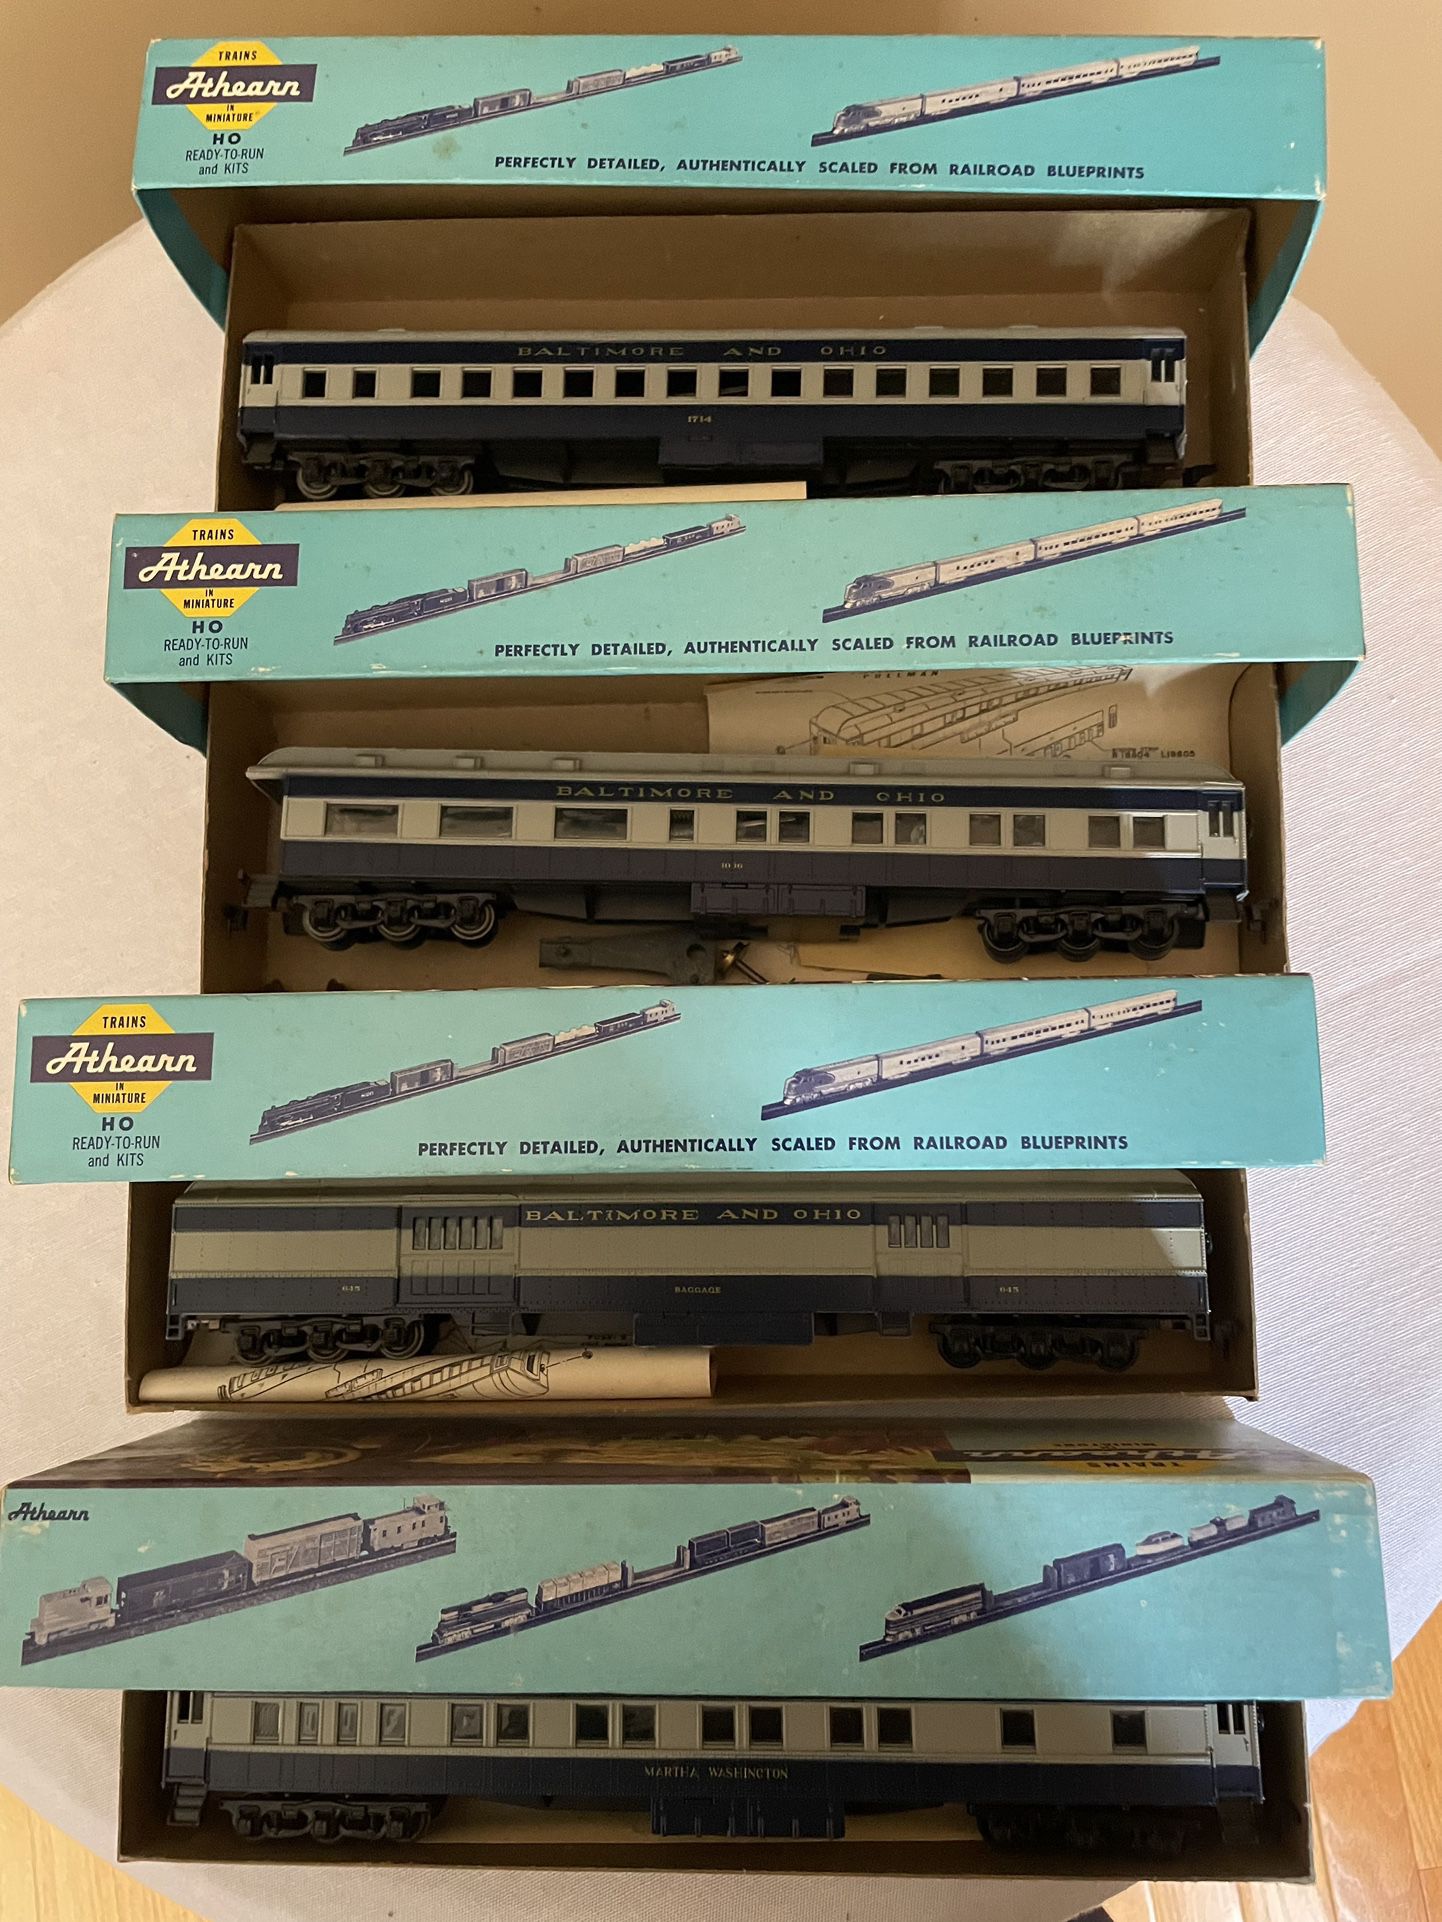 Lot of 4 Athearn miniature trains 1(contact info removed) 1(contact info removed) Baltimore & Ohio 